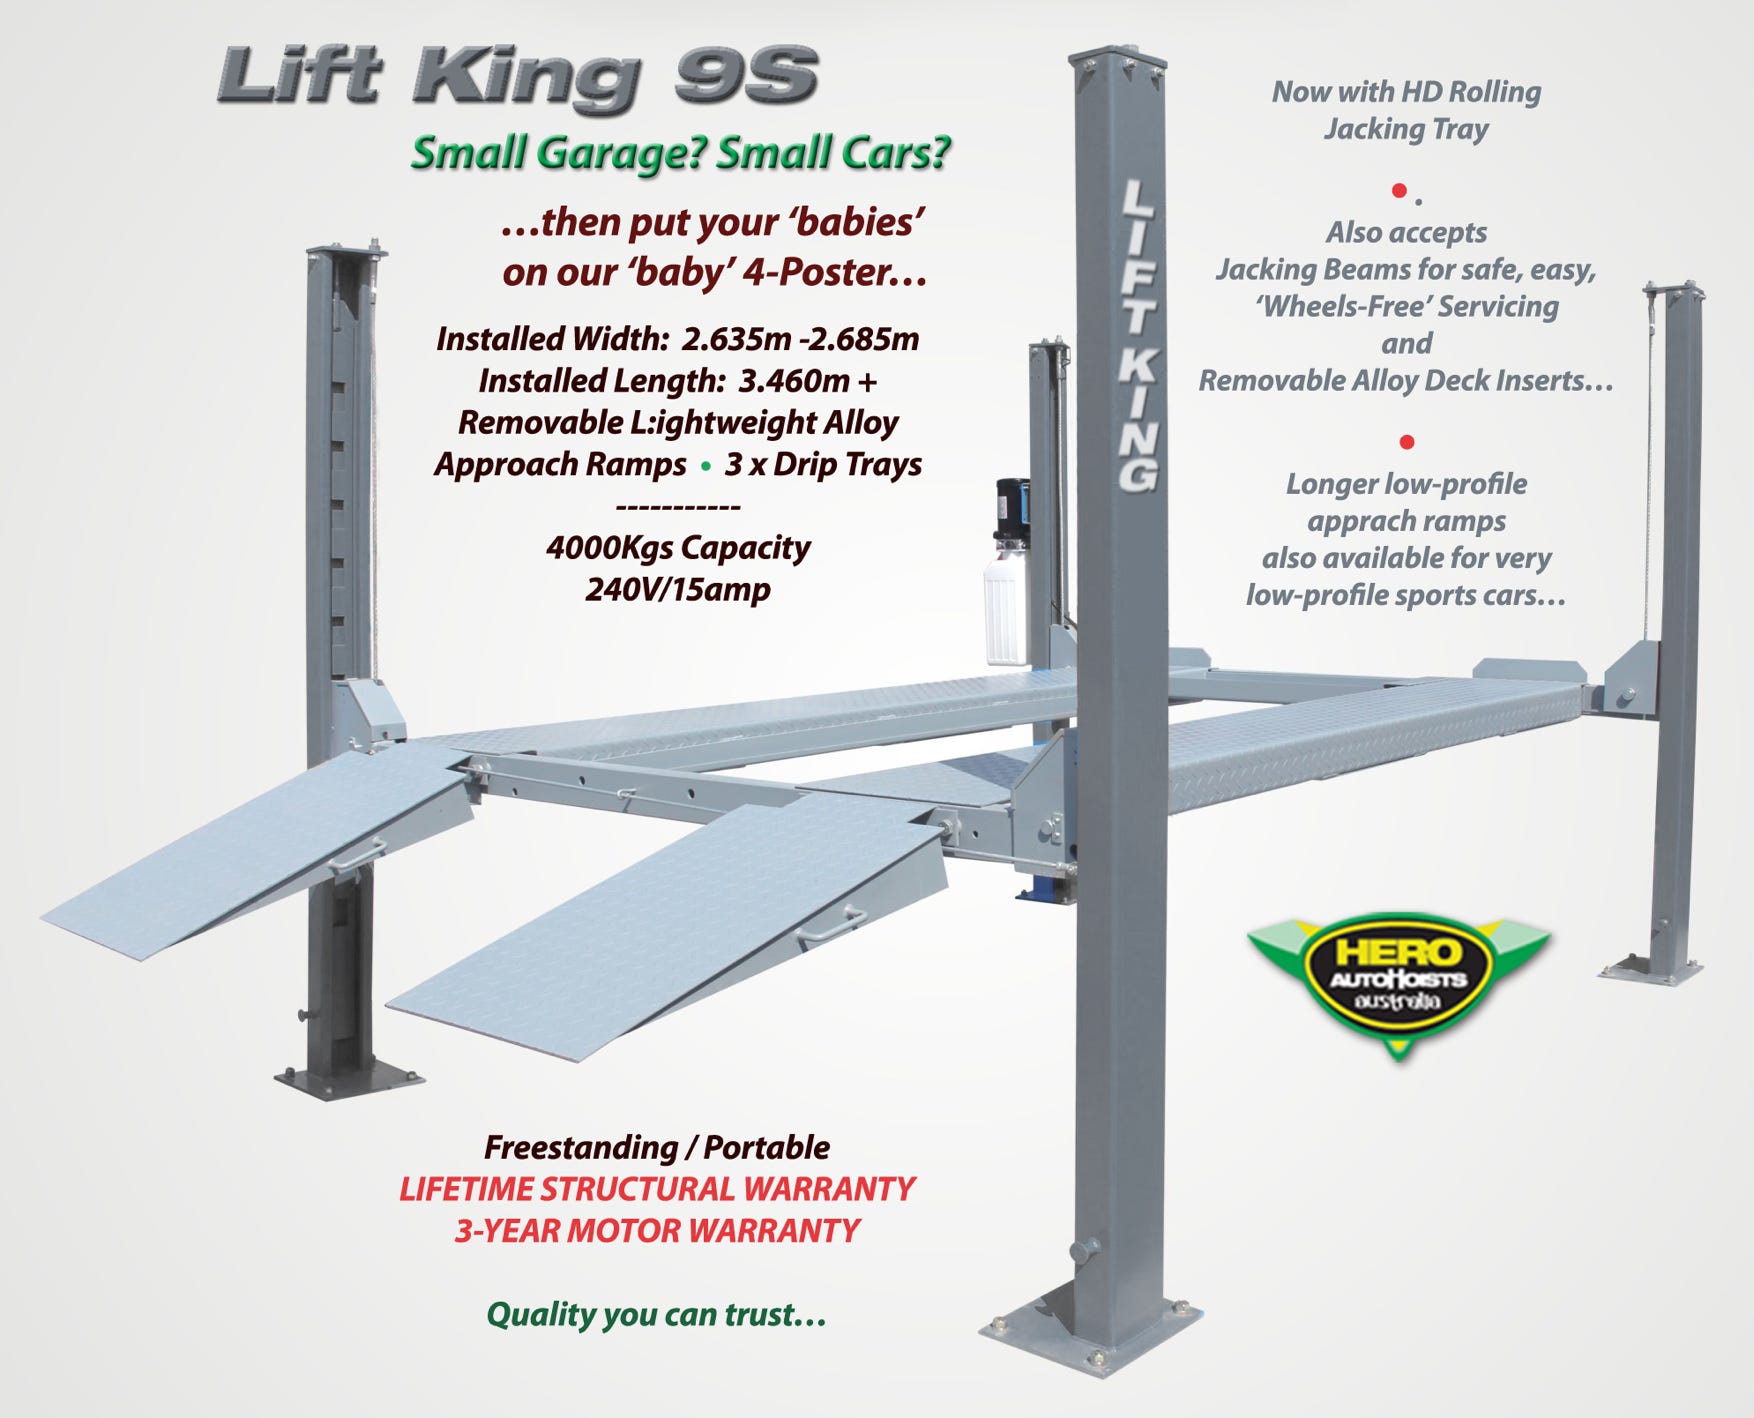 The Lift King 9S - great for small spaces - yet still able to accommodate full-sized sedans...